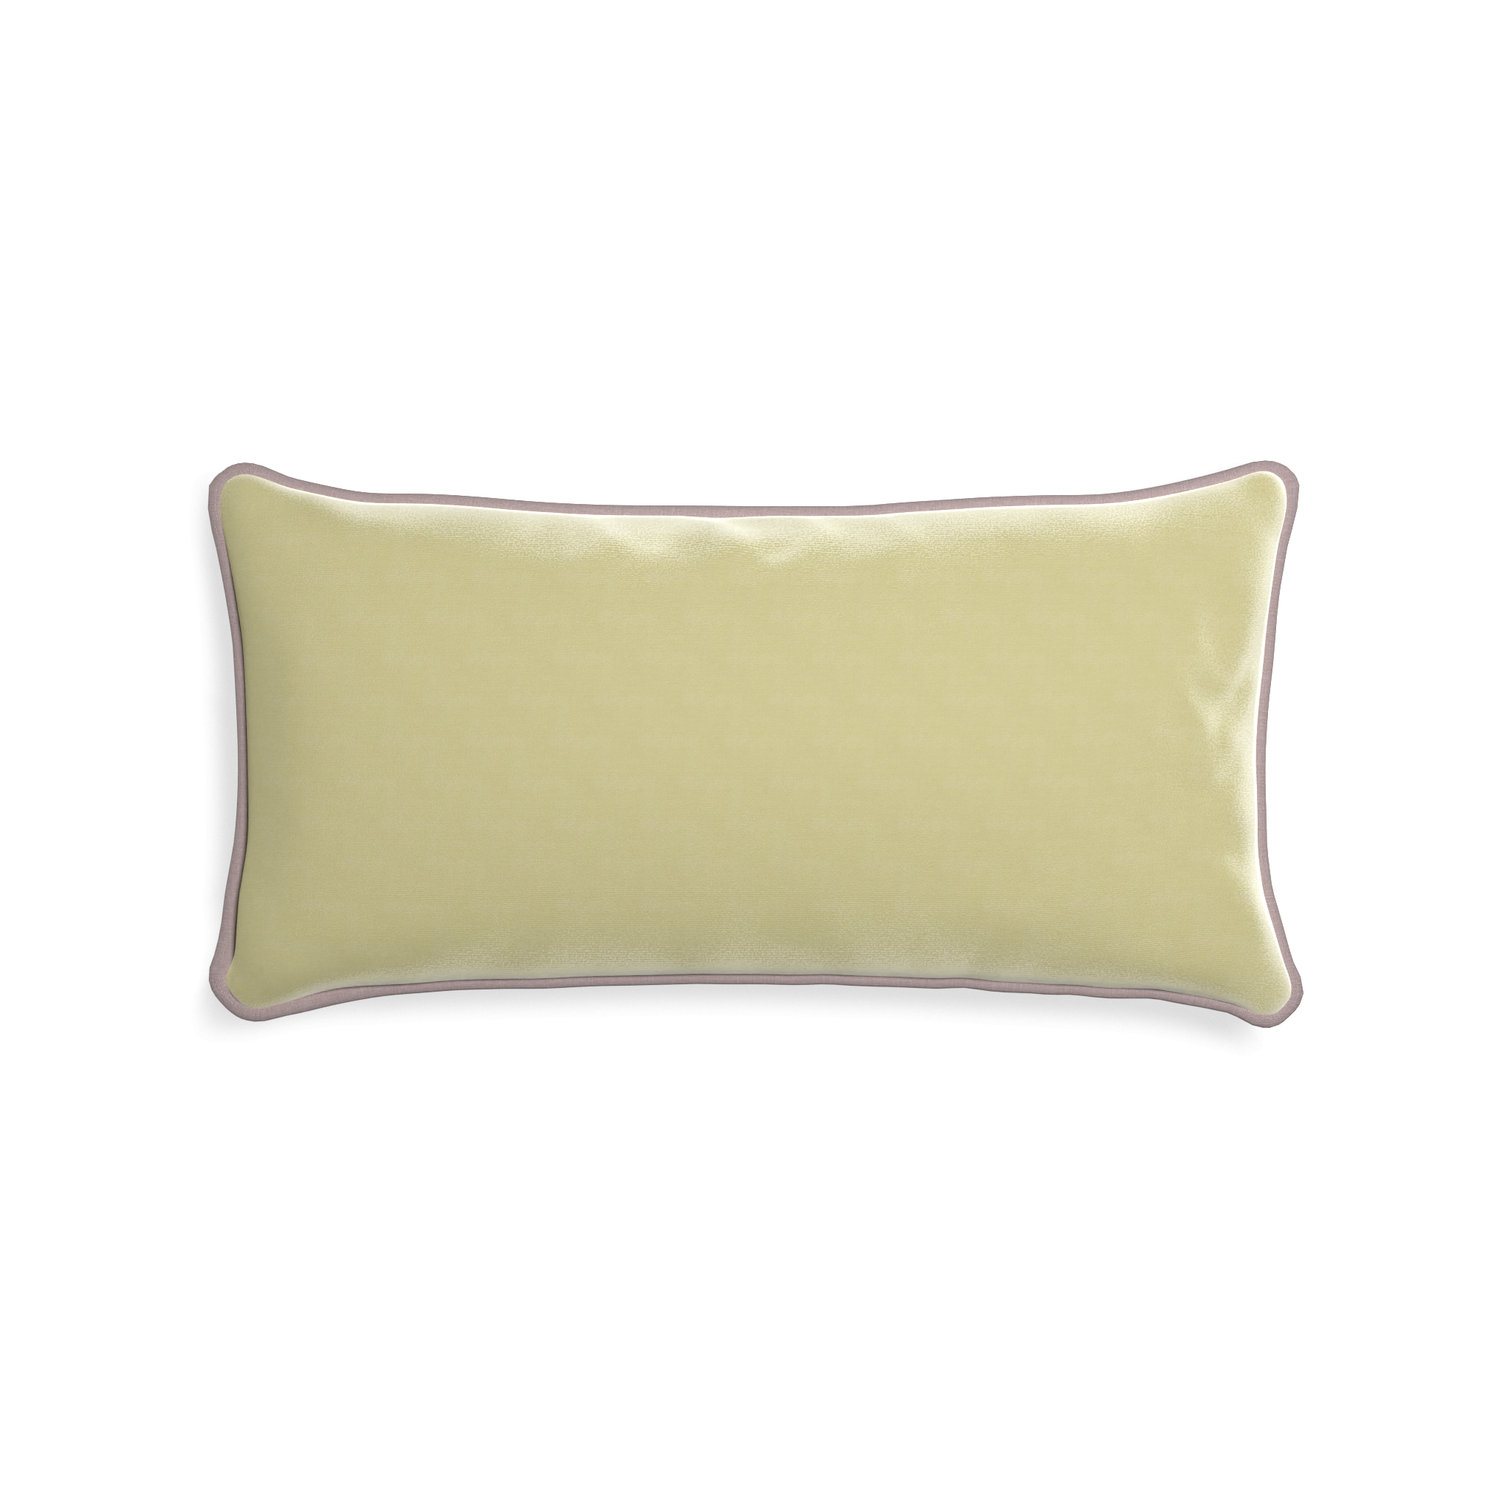 Midi-lumbar pear velvet custom light greenpillow with orchid piping on white background